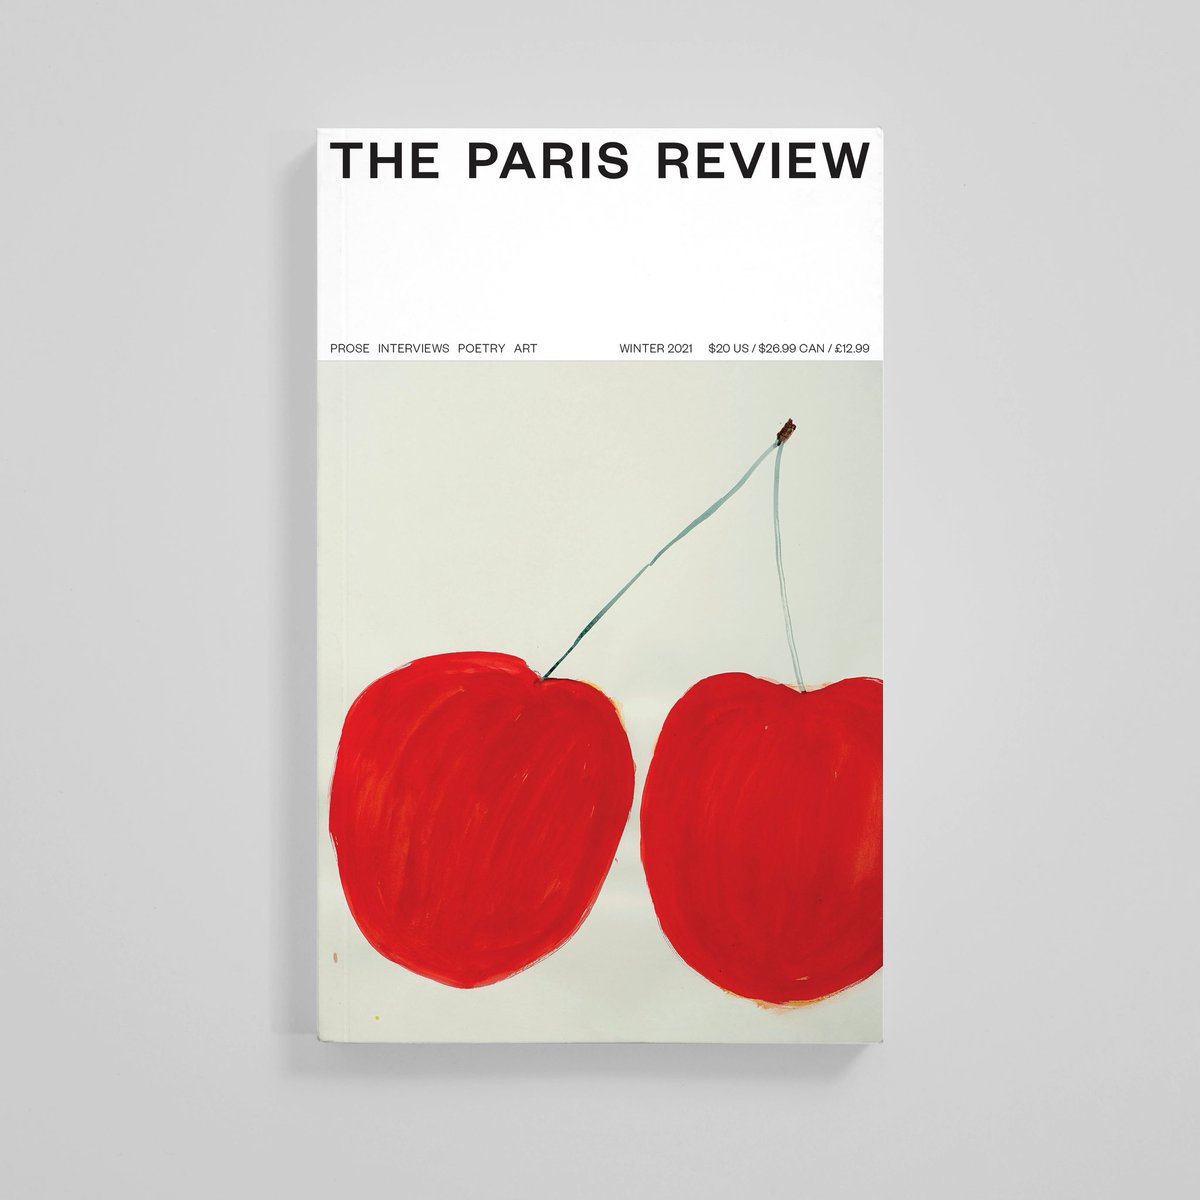 Redesign of @parisreview by @MrMattWilley —